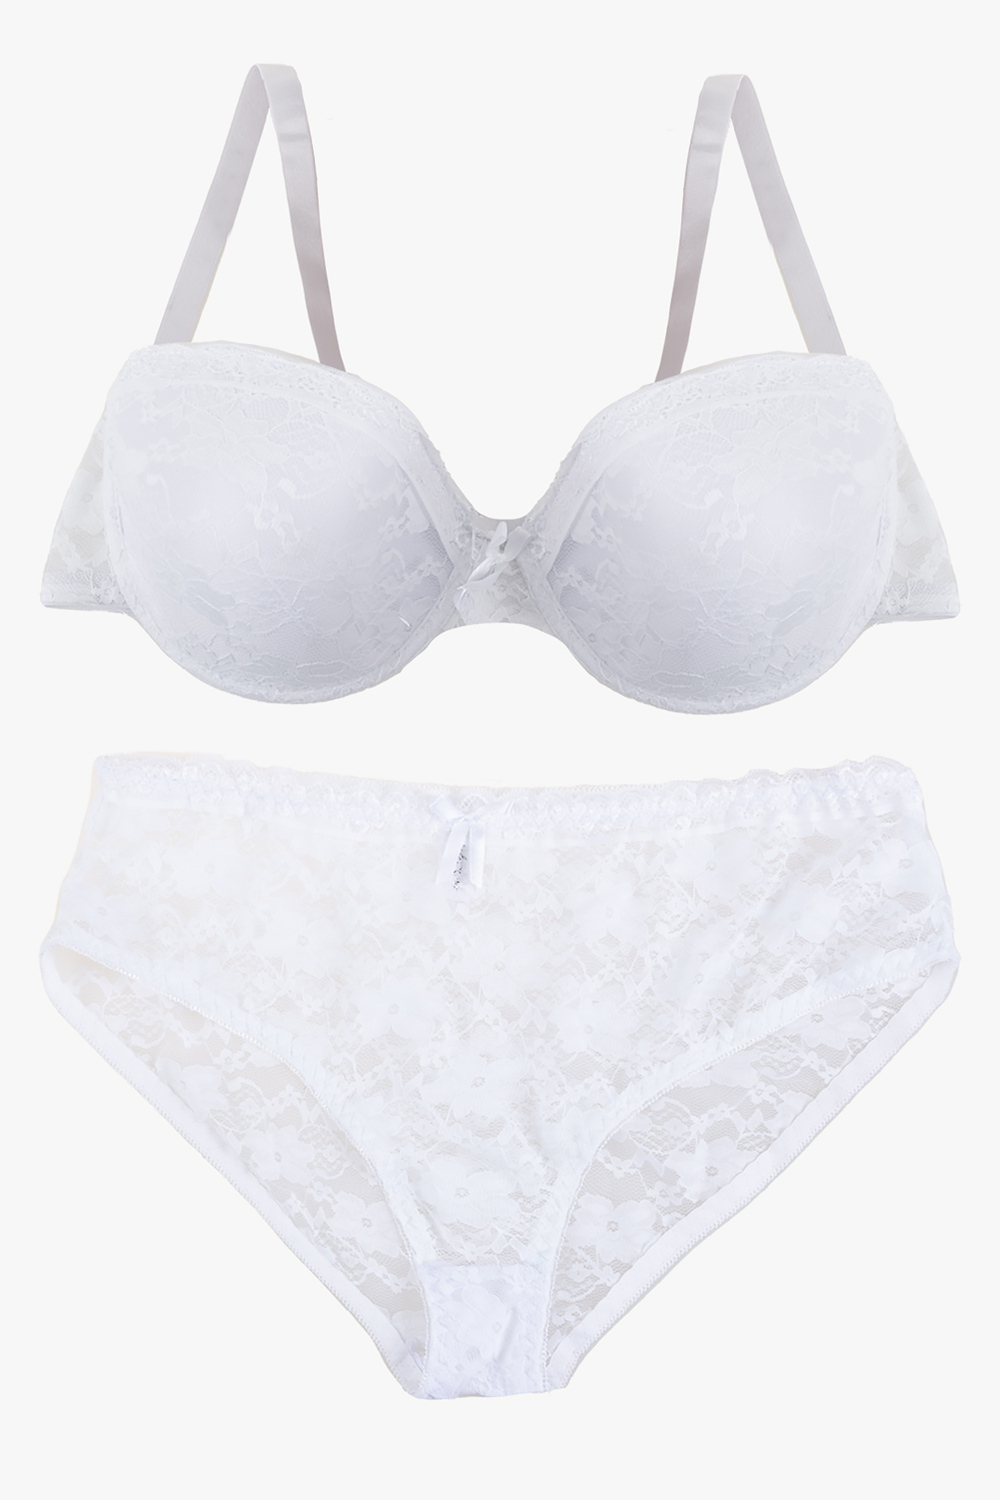 https://www.rossy.ca/media/A2W/products/full-coverage-lace-underwire-bra-set-with-cheeky-panty-white-plus-size-76729-1.jpg